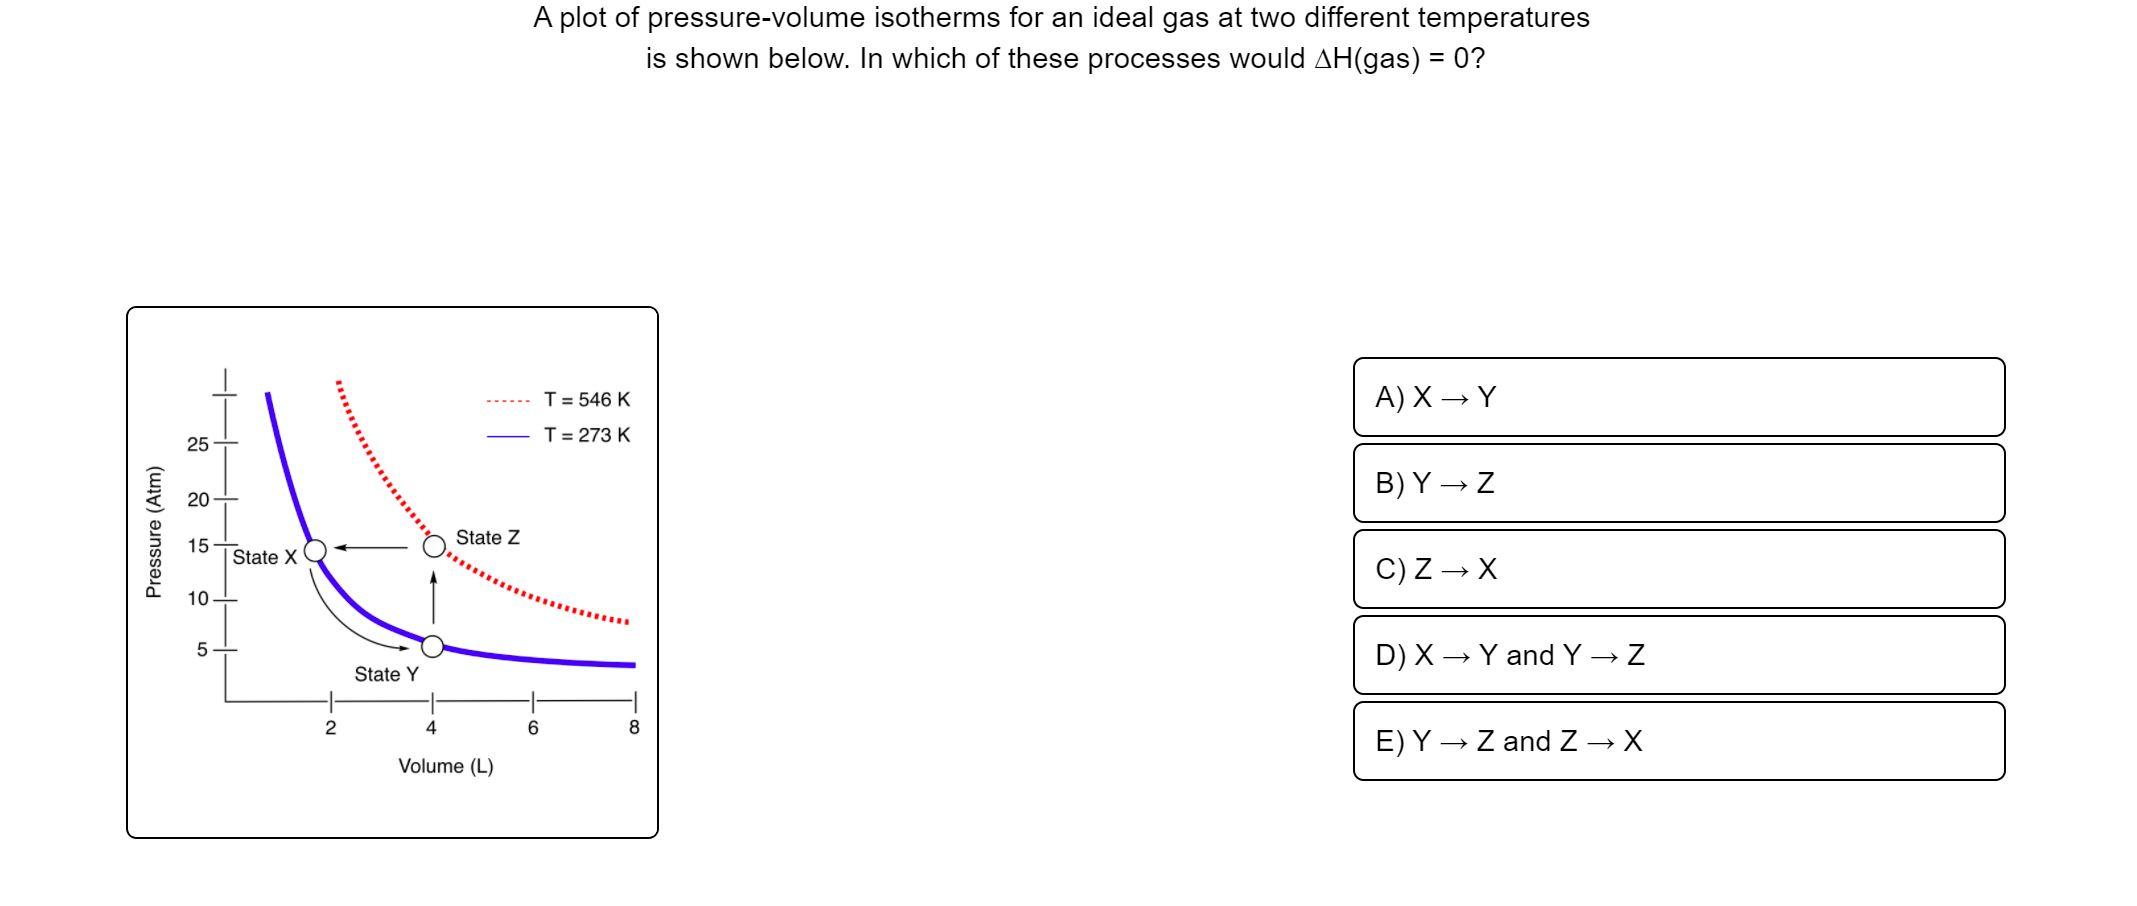 Ideal gas isotherms are given by a family of hyperbolas and there